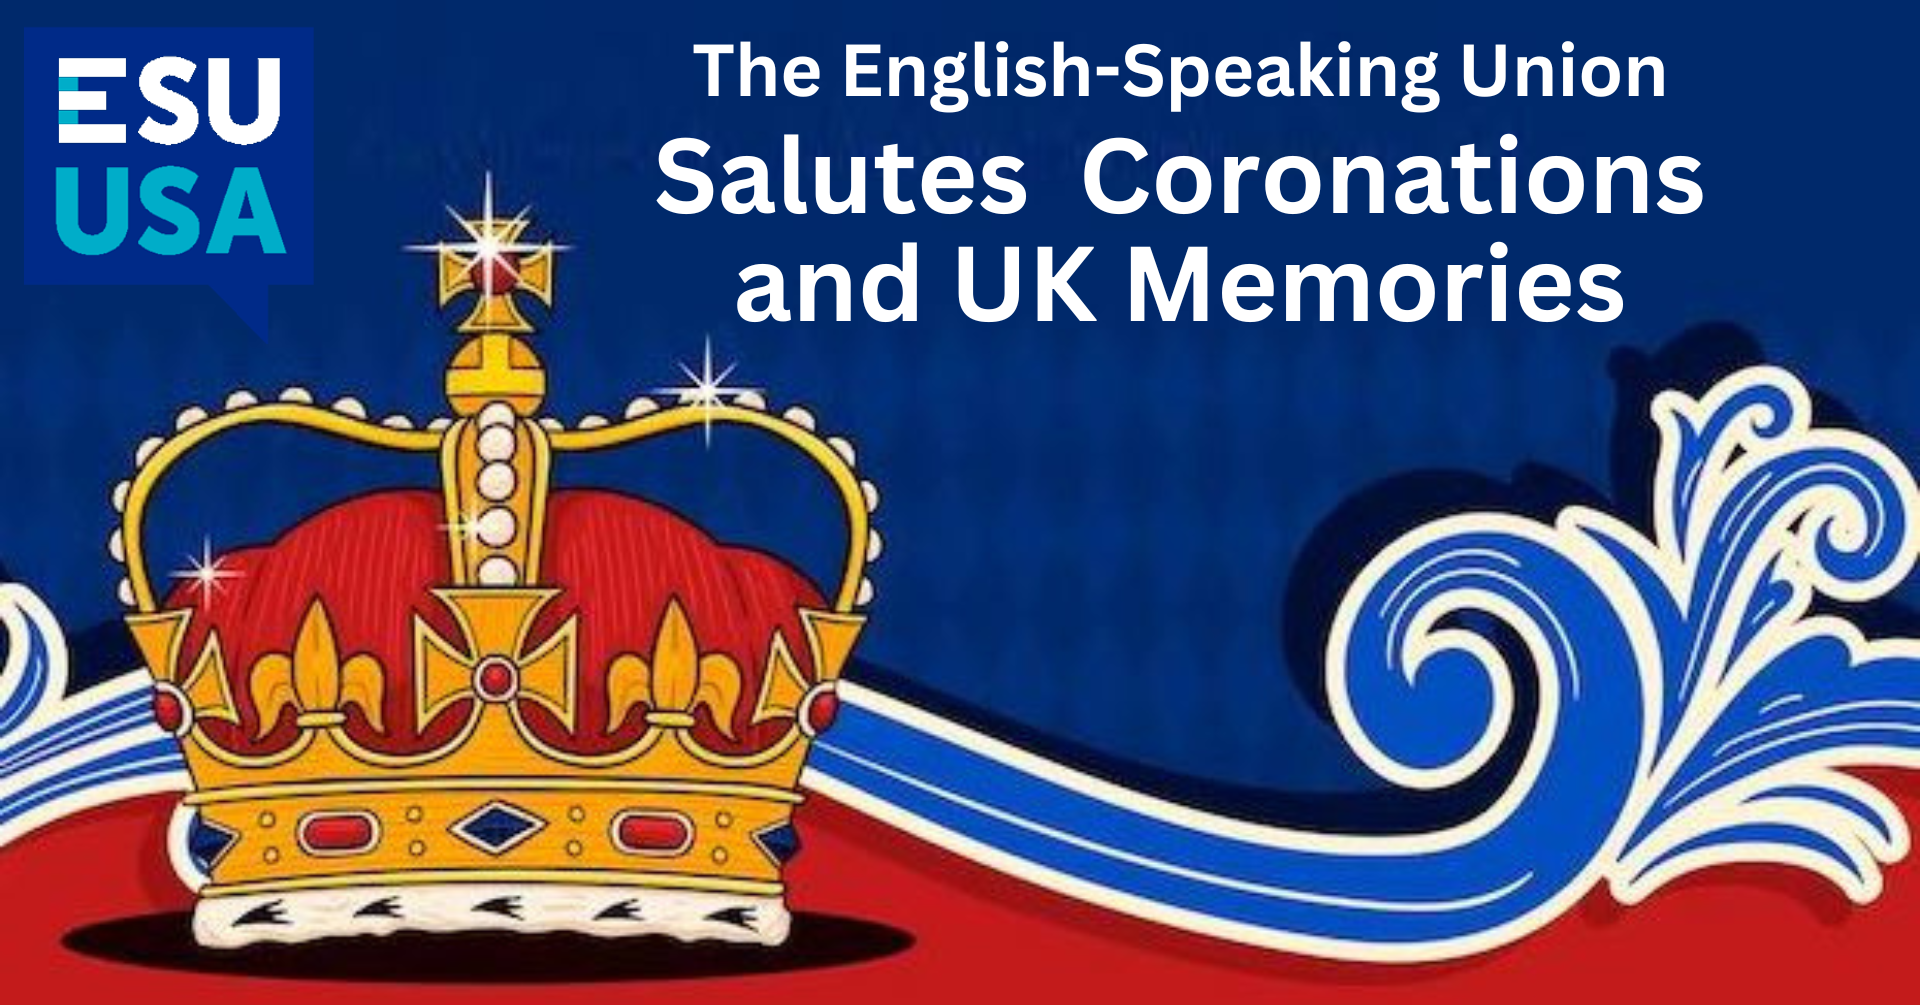 The English-Speaking Union Salutes Coronations and UK Memories